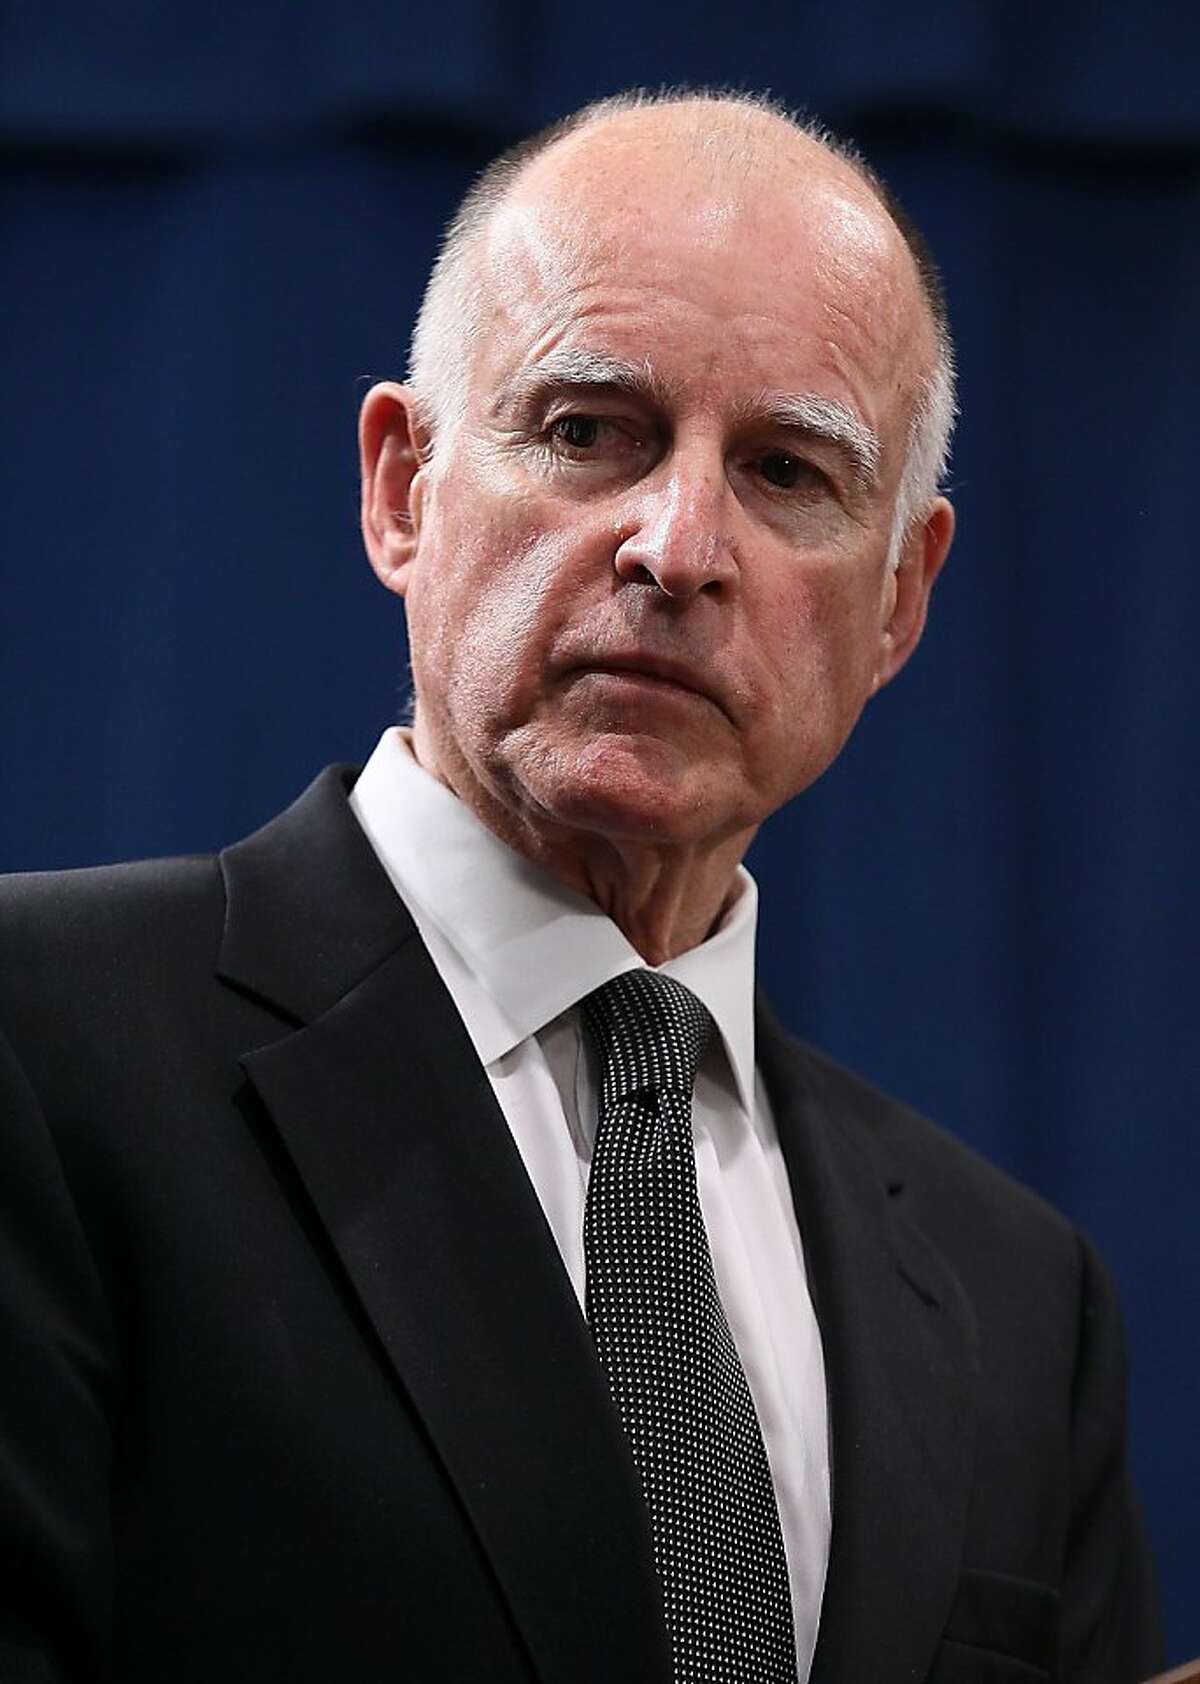 SACRAMENTO, CA - MARCH 24: California Gov. Jerry Brown speaks to reporters following a bill signing on March 24, 2011 in Sacramento, California. California Gov. Jerry Brown signed 13 bills into law that will cut $11.2 billion from California's budget deficit. $12.6 billion still needs to be cut to balance the budget.